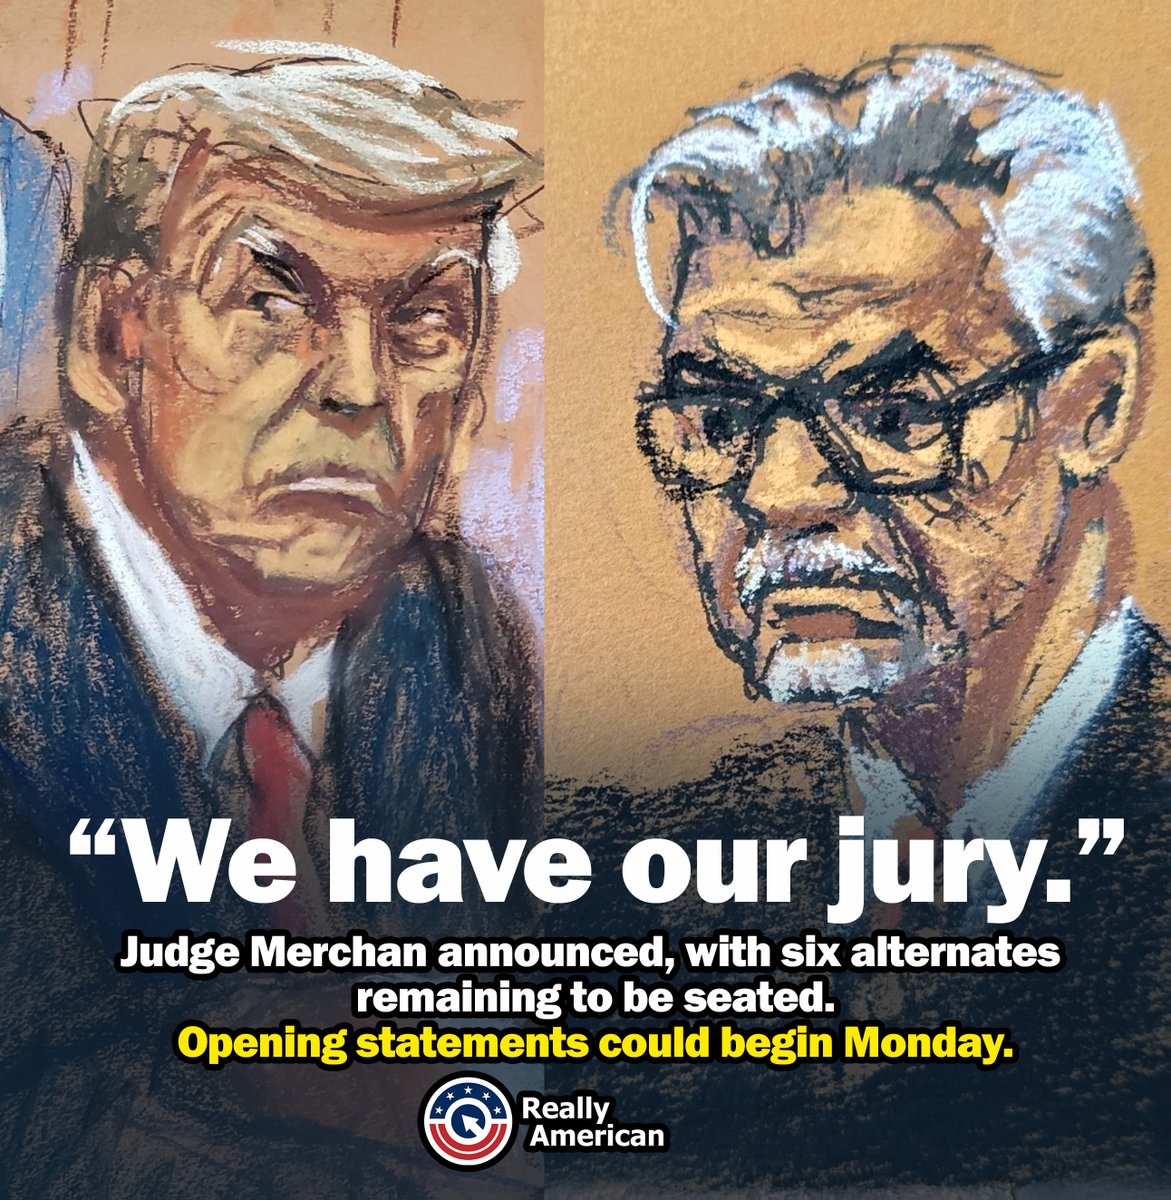 'We have our jury.' The criminal prosecution of Donald Trump is about to commence as early as Monday, with only six alternate jurors remaining to be seated. A majority of voters across the political spectrum have already indicated that a conviction of the former disgraced